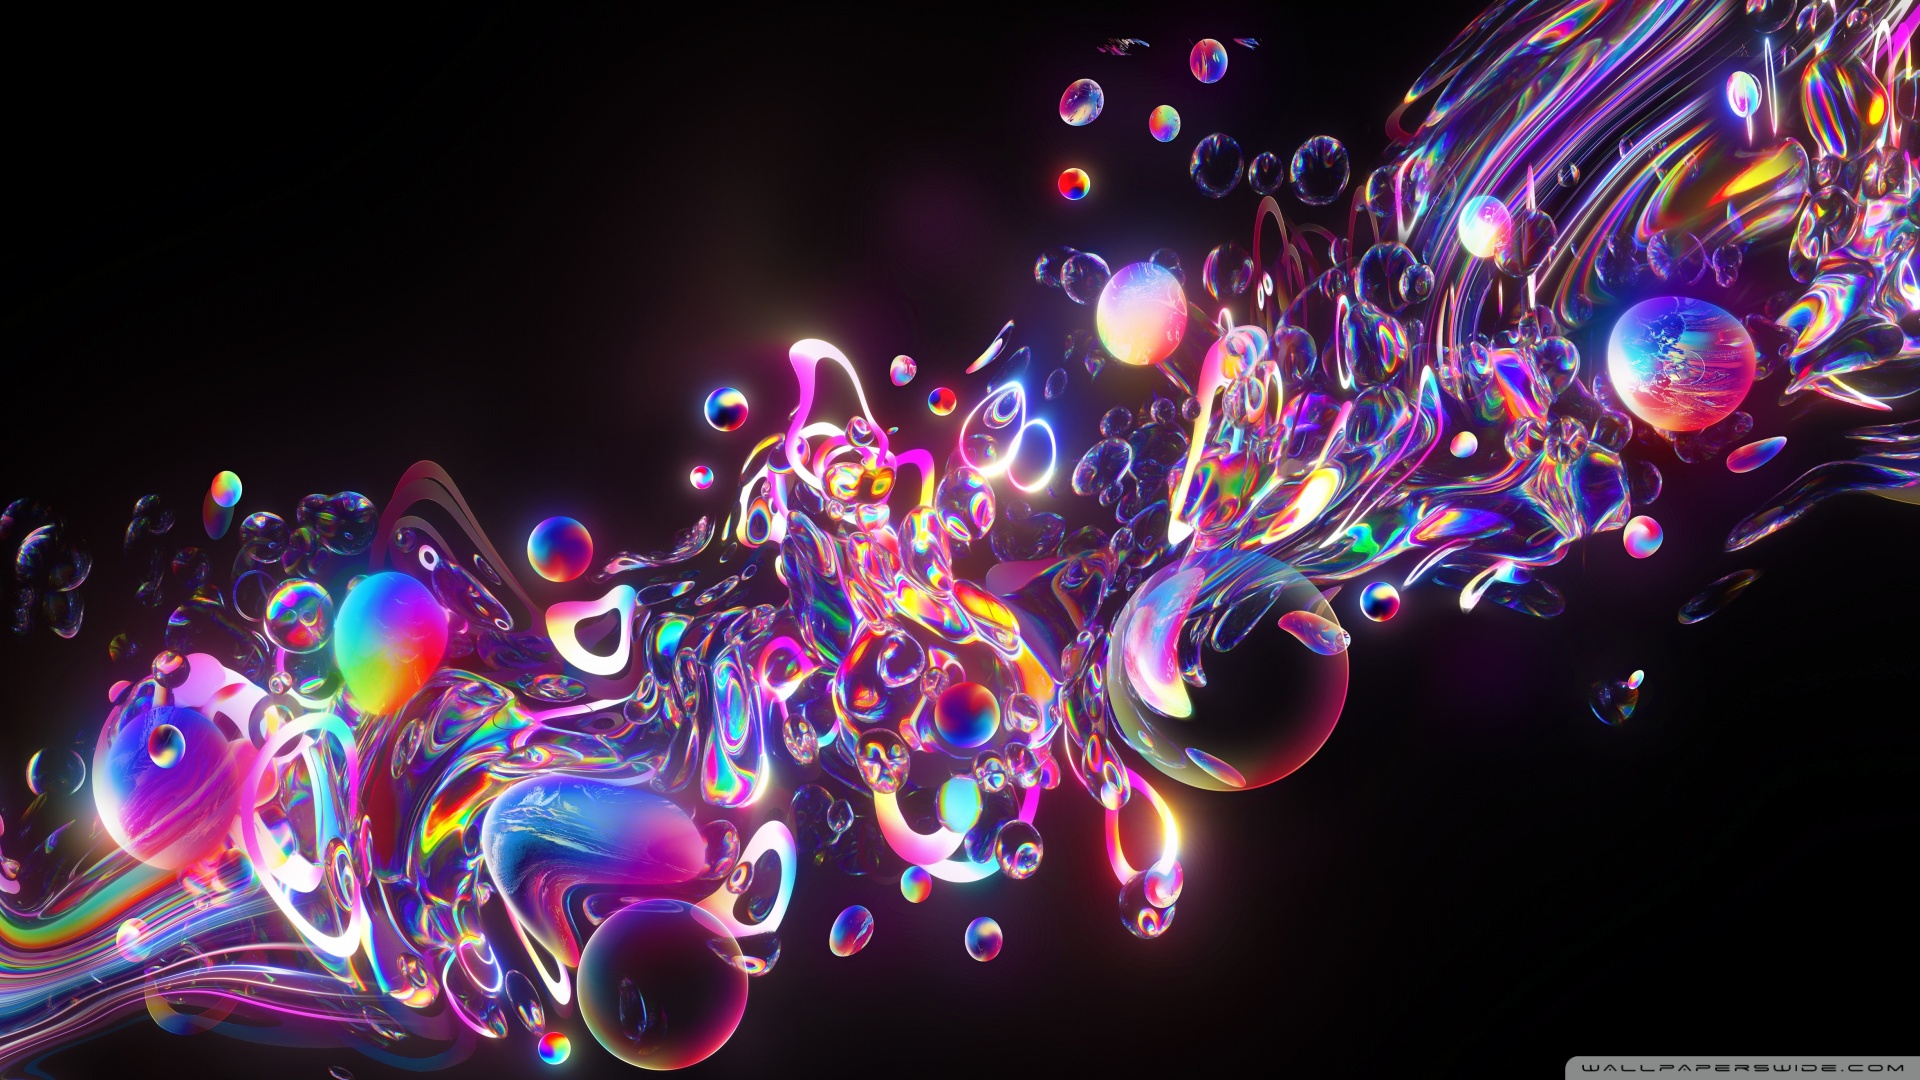 Colorful Iridescent Bubbles Ultra HD Desktop Background Wallpaper for: Multi Display, Dual & Triple Monitor